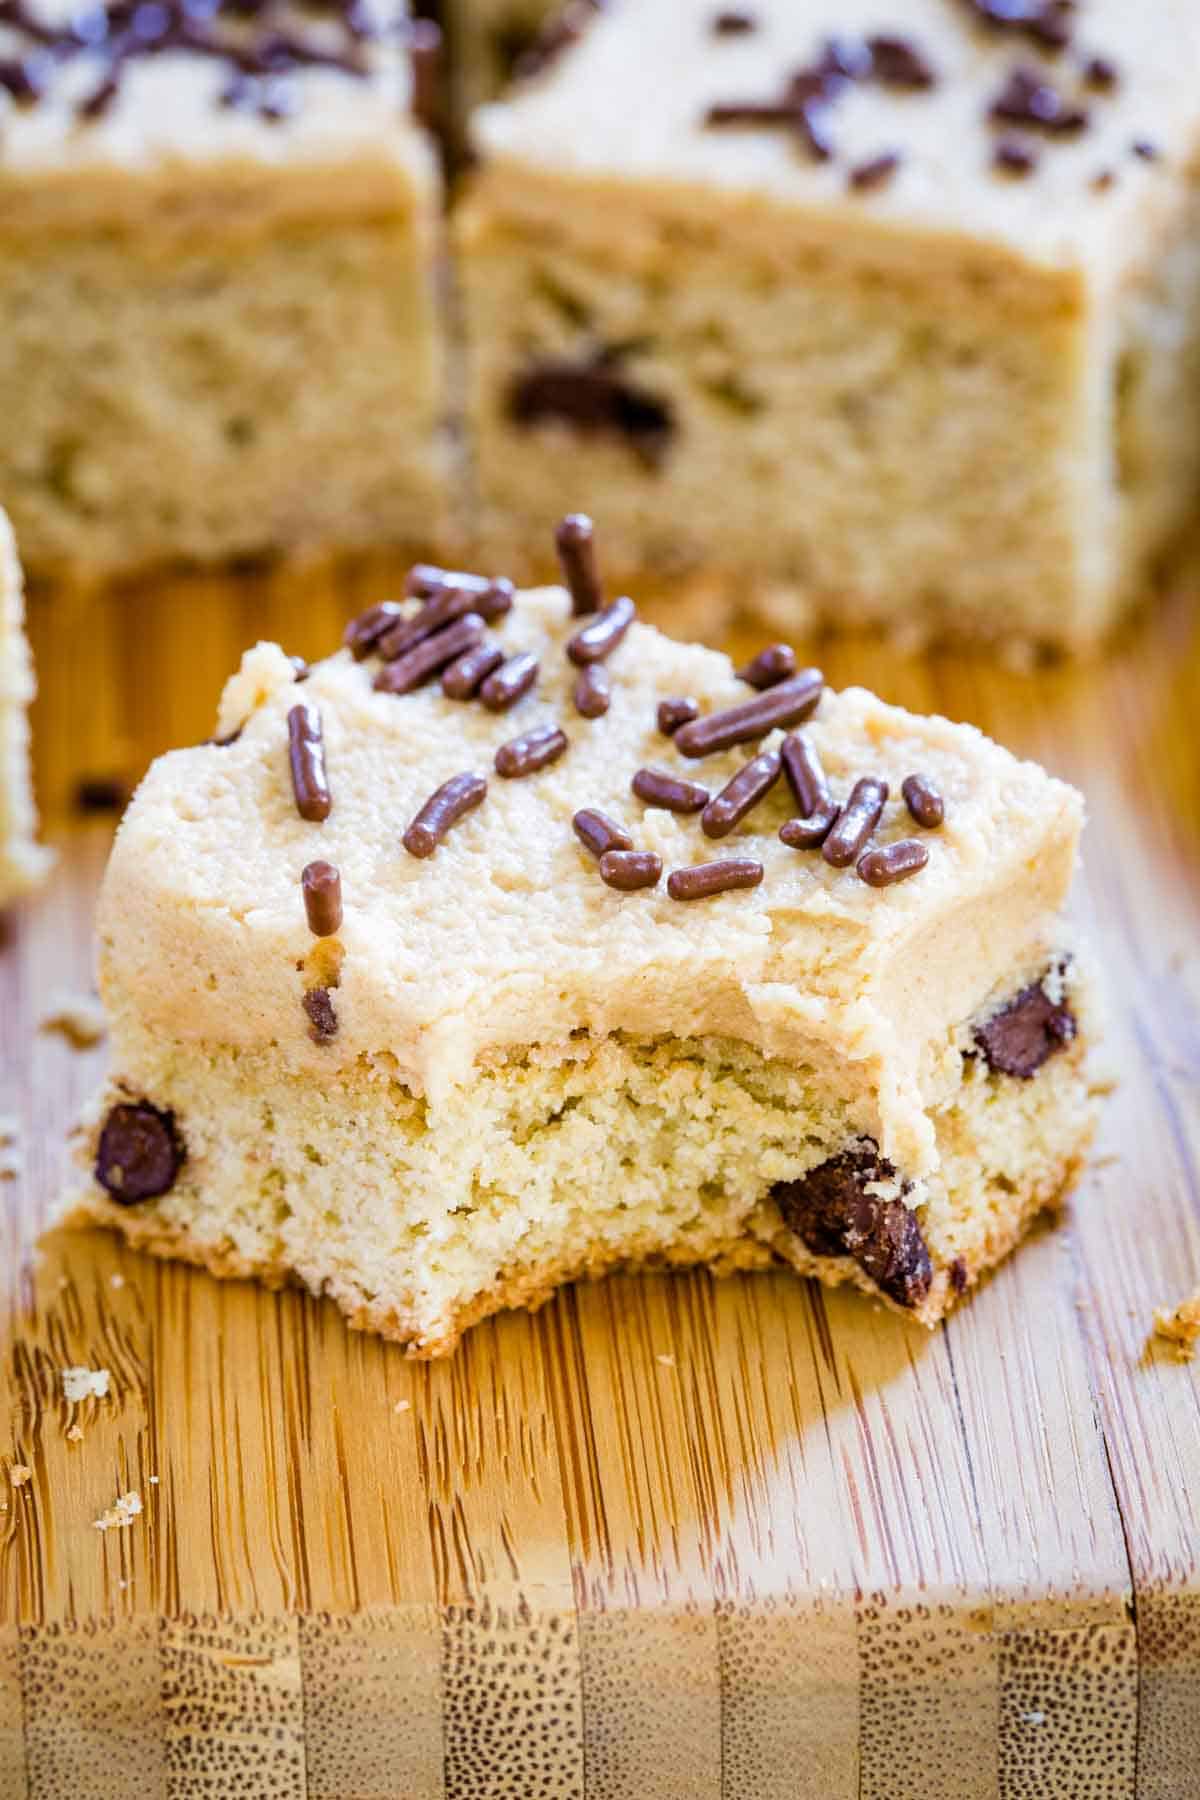 A chocolate chip cookie bar on a wooden board with a bite taken out.